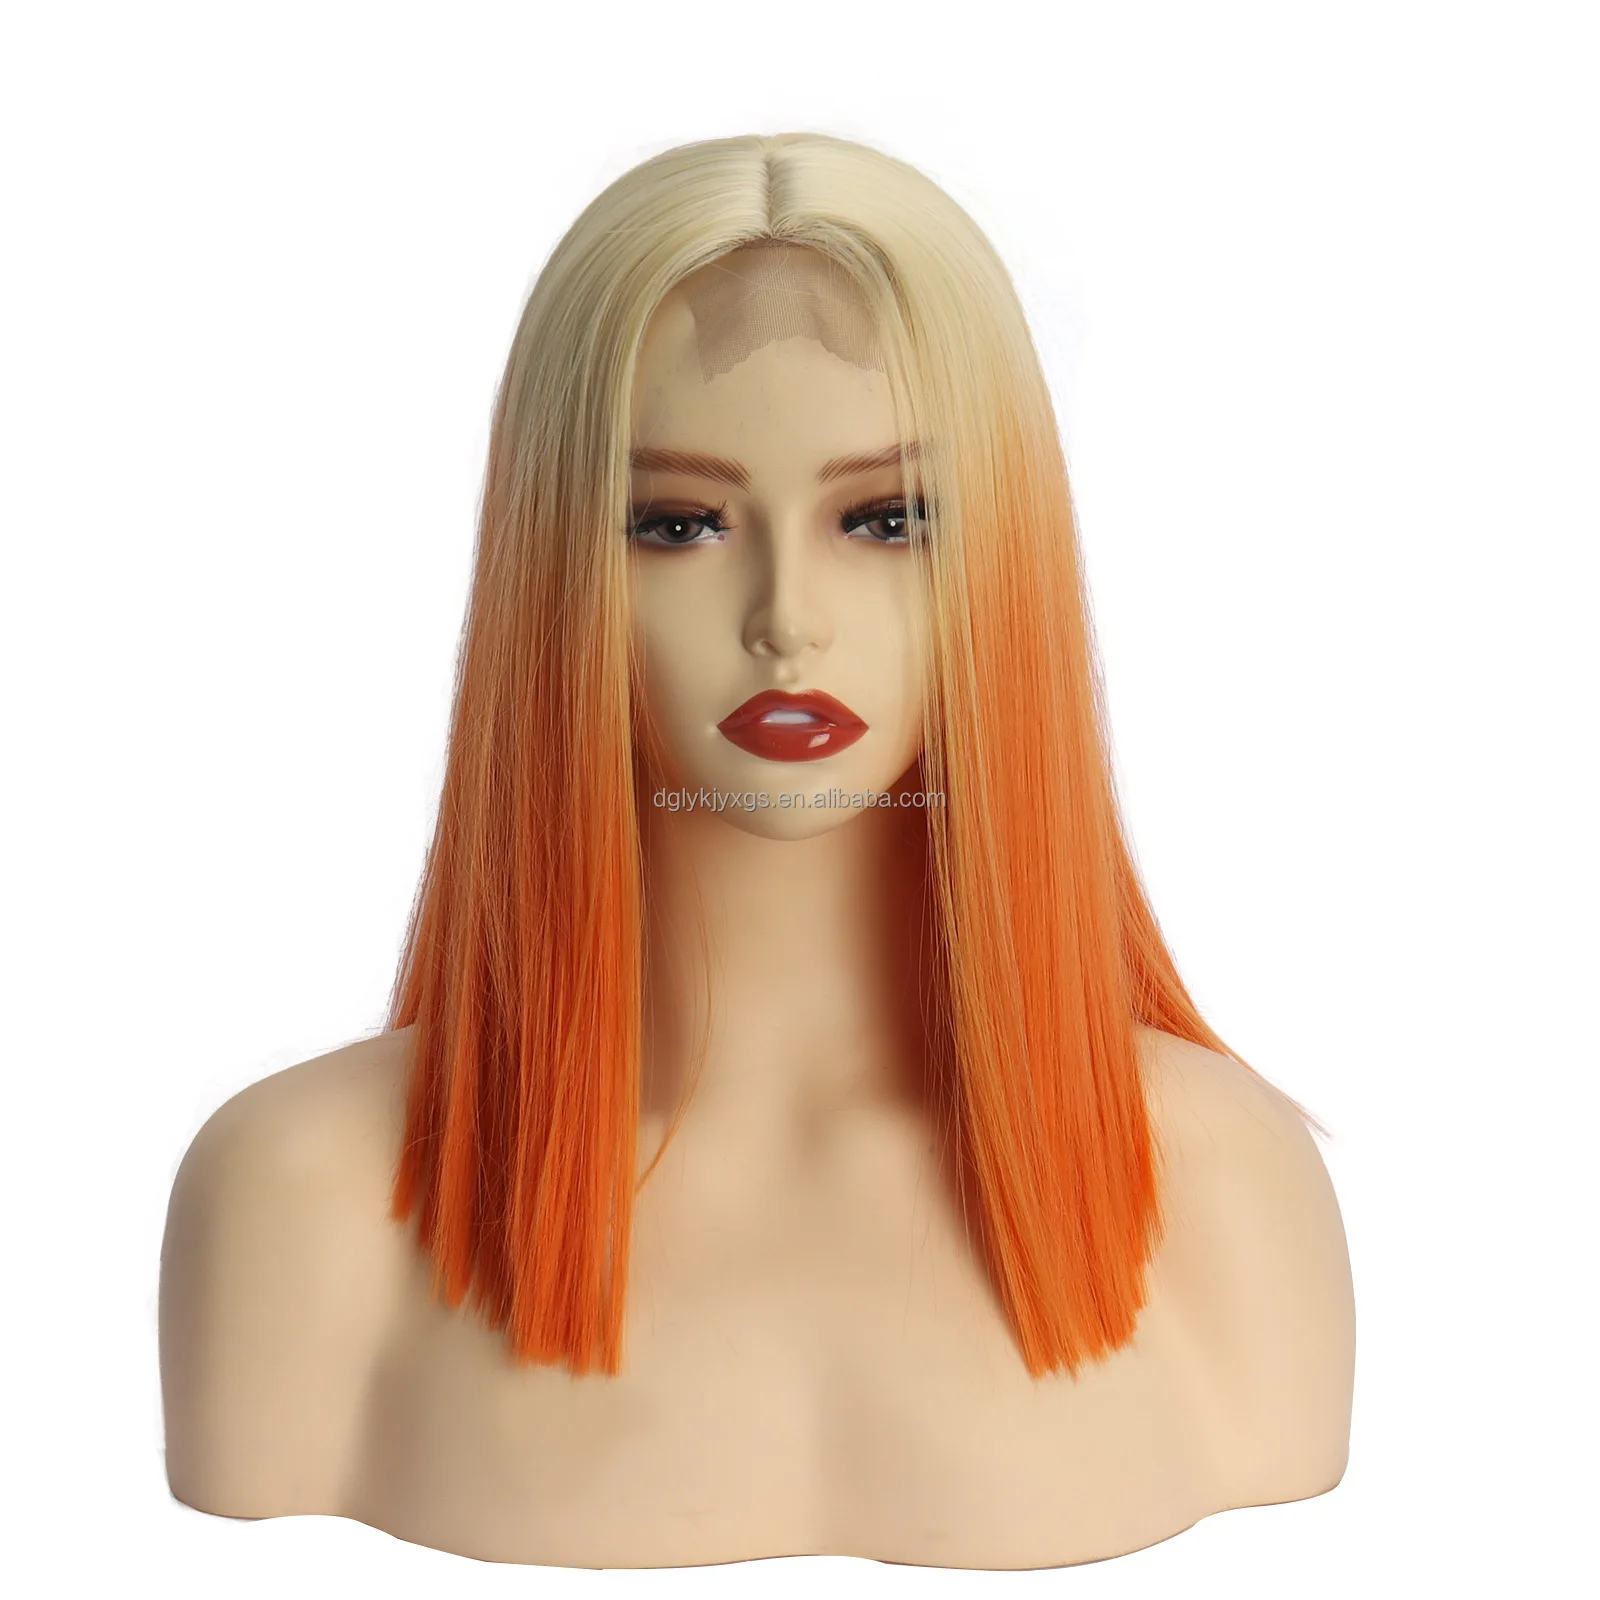 

Heat Resistant Short Bob Lace Wigs WL05 Straight Blonde Ombre Pink Orange Red Long Synthetic Hair Body Wave Lace Front Wig 1pcs